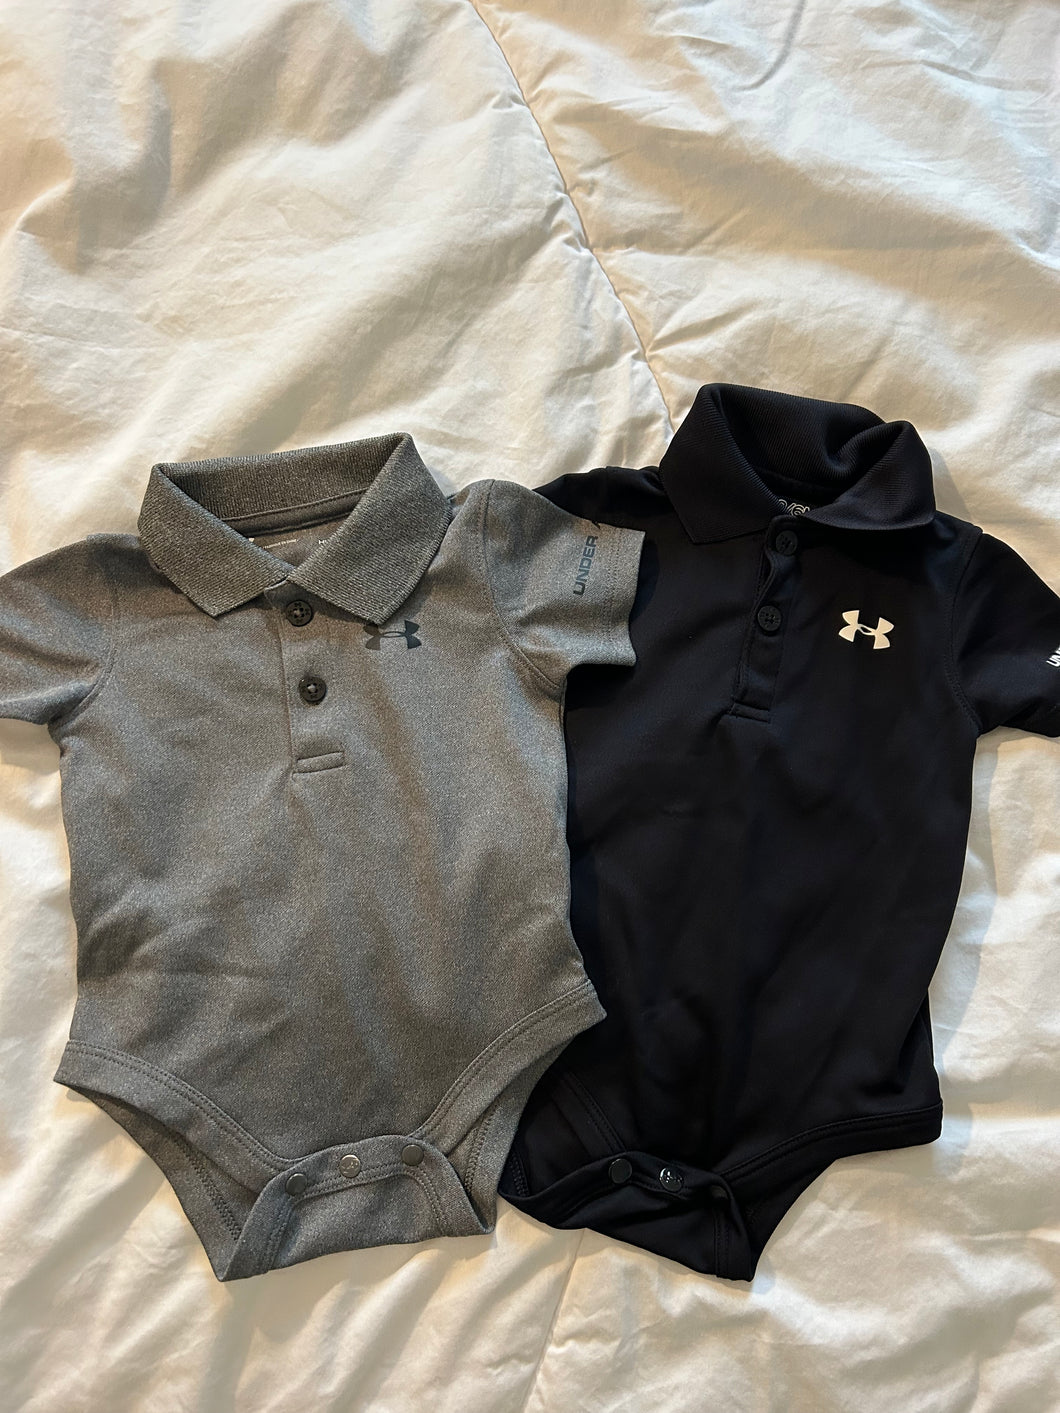 Two Under Armour Polo Onesies 3 months